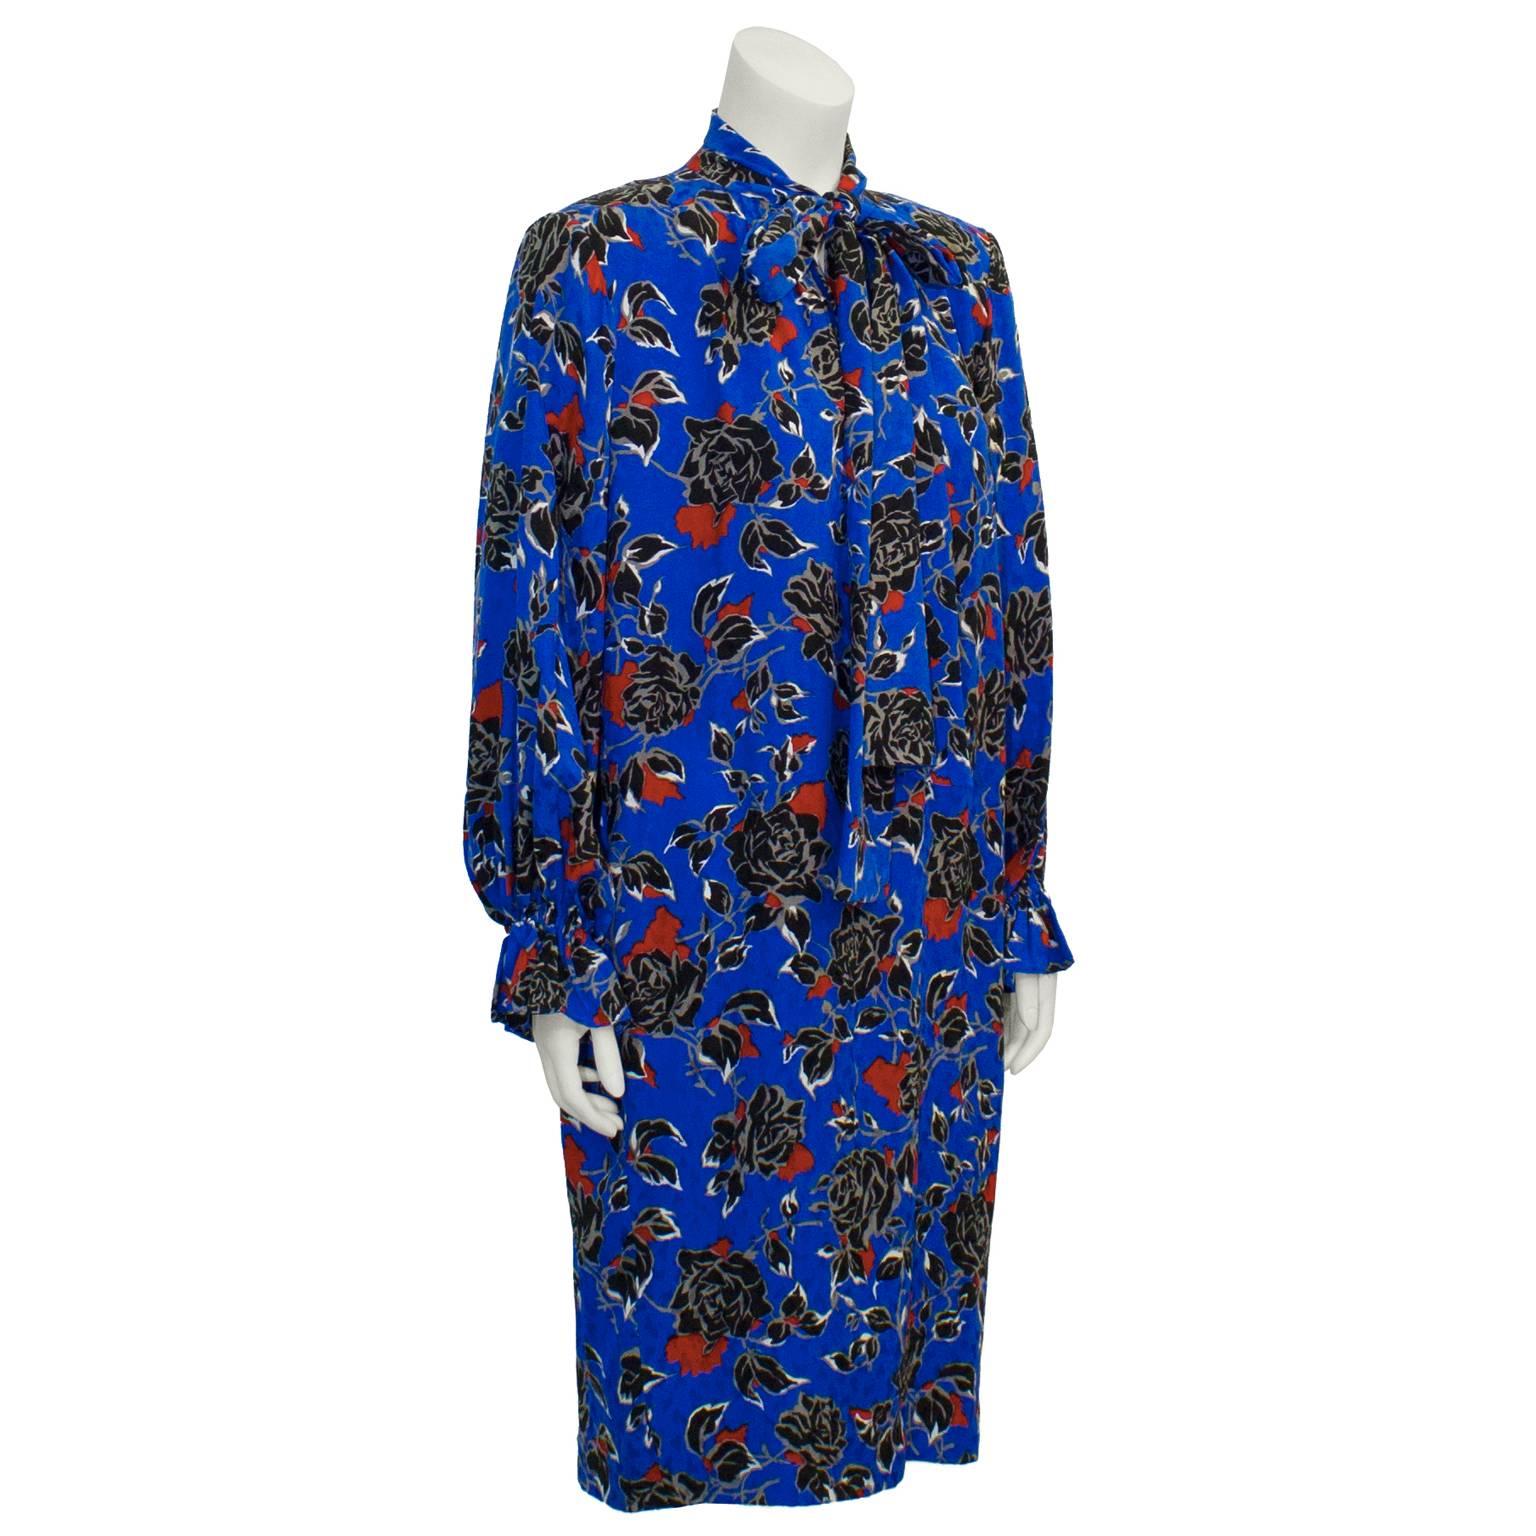 Amazing Yves Saint Laurent electric blue silk jacquard long sleeve dress  with sweet neck tie from the 1980s. Features a semi abstract rose pattern with notes of black, white, red and grey. Padded shoulders, and a v-neck with a long tie collar.